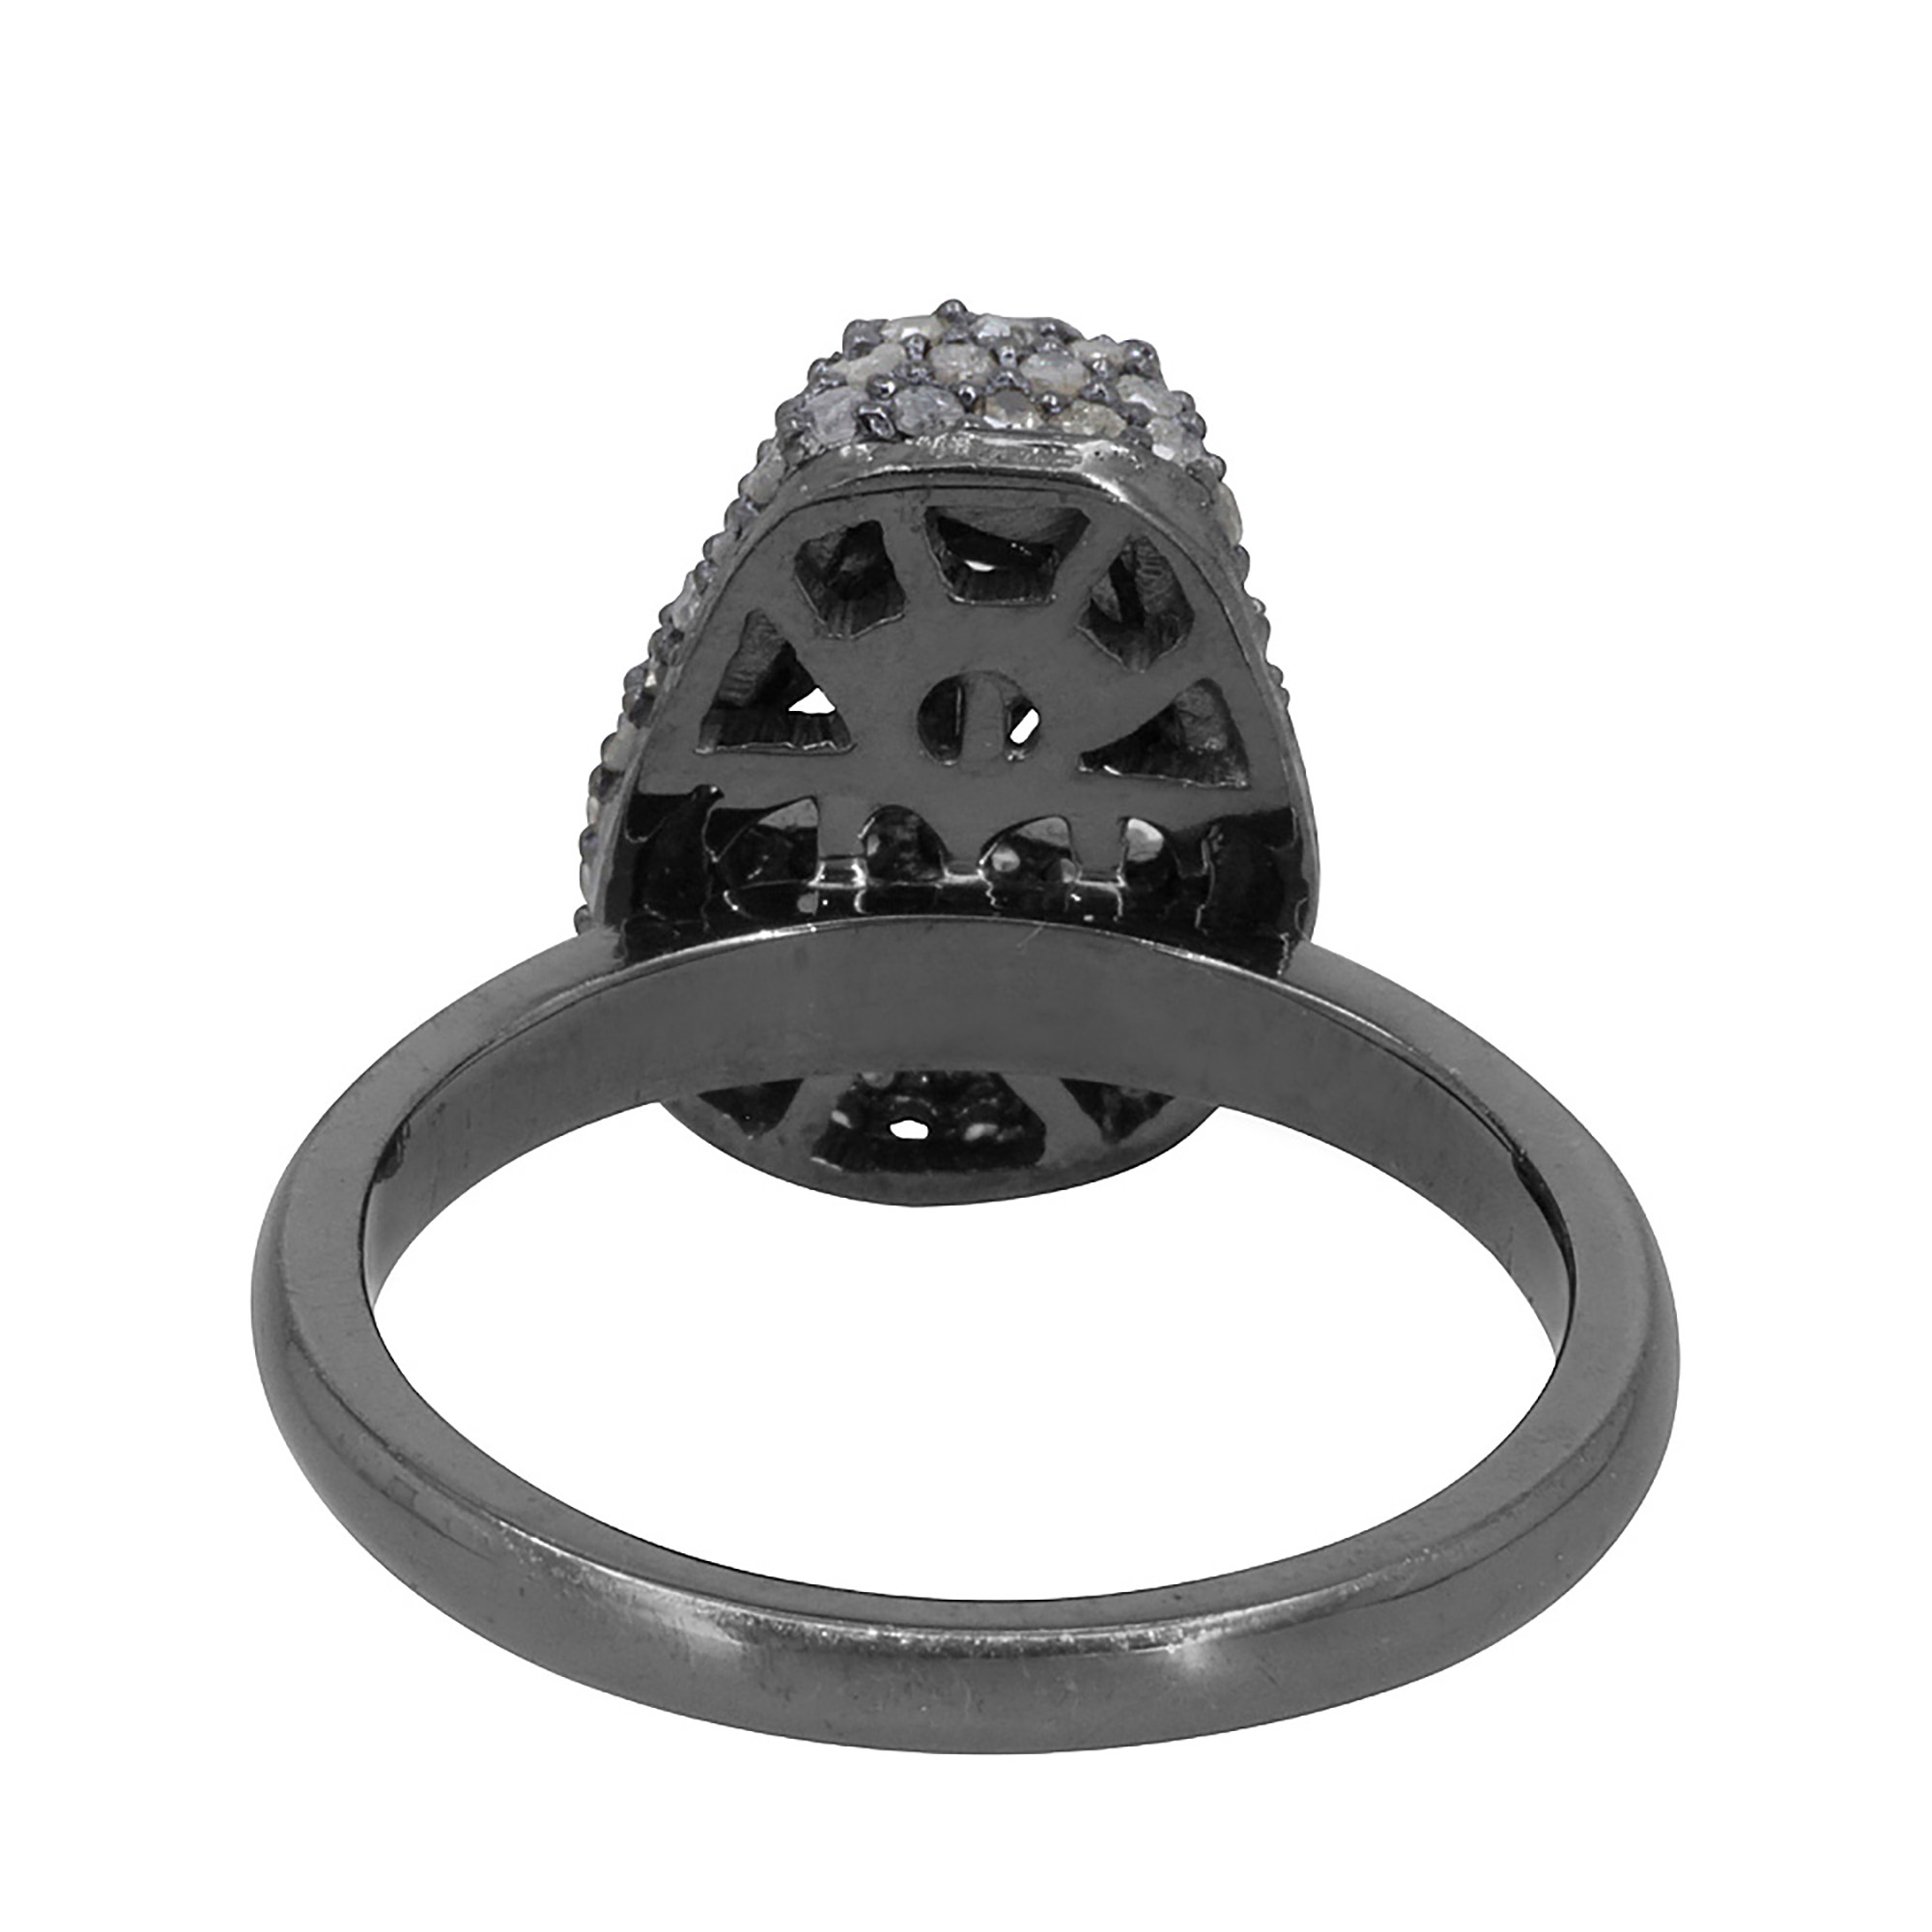 Pure silver skull shape ring with pave diamond jewelry